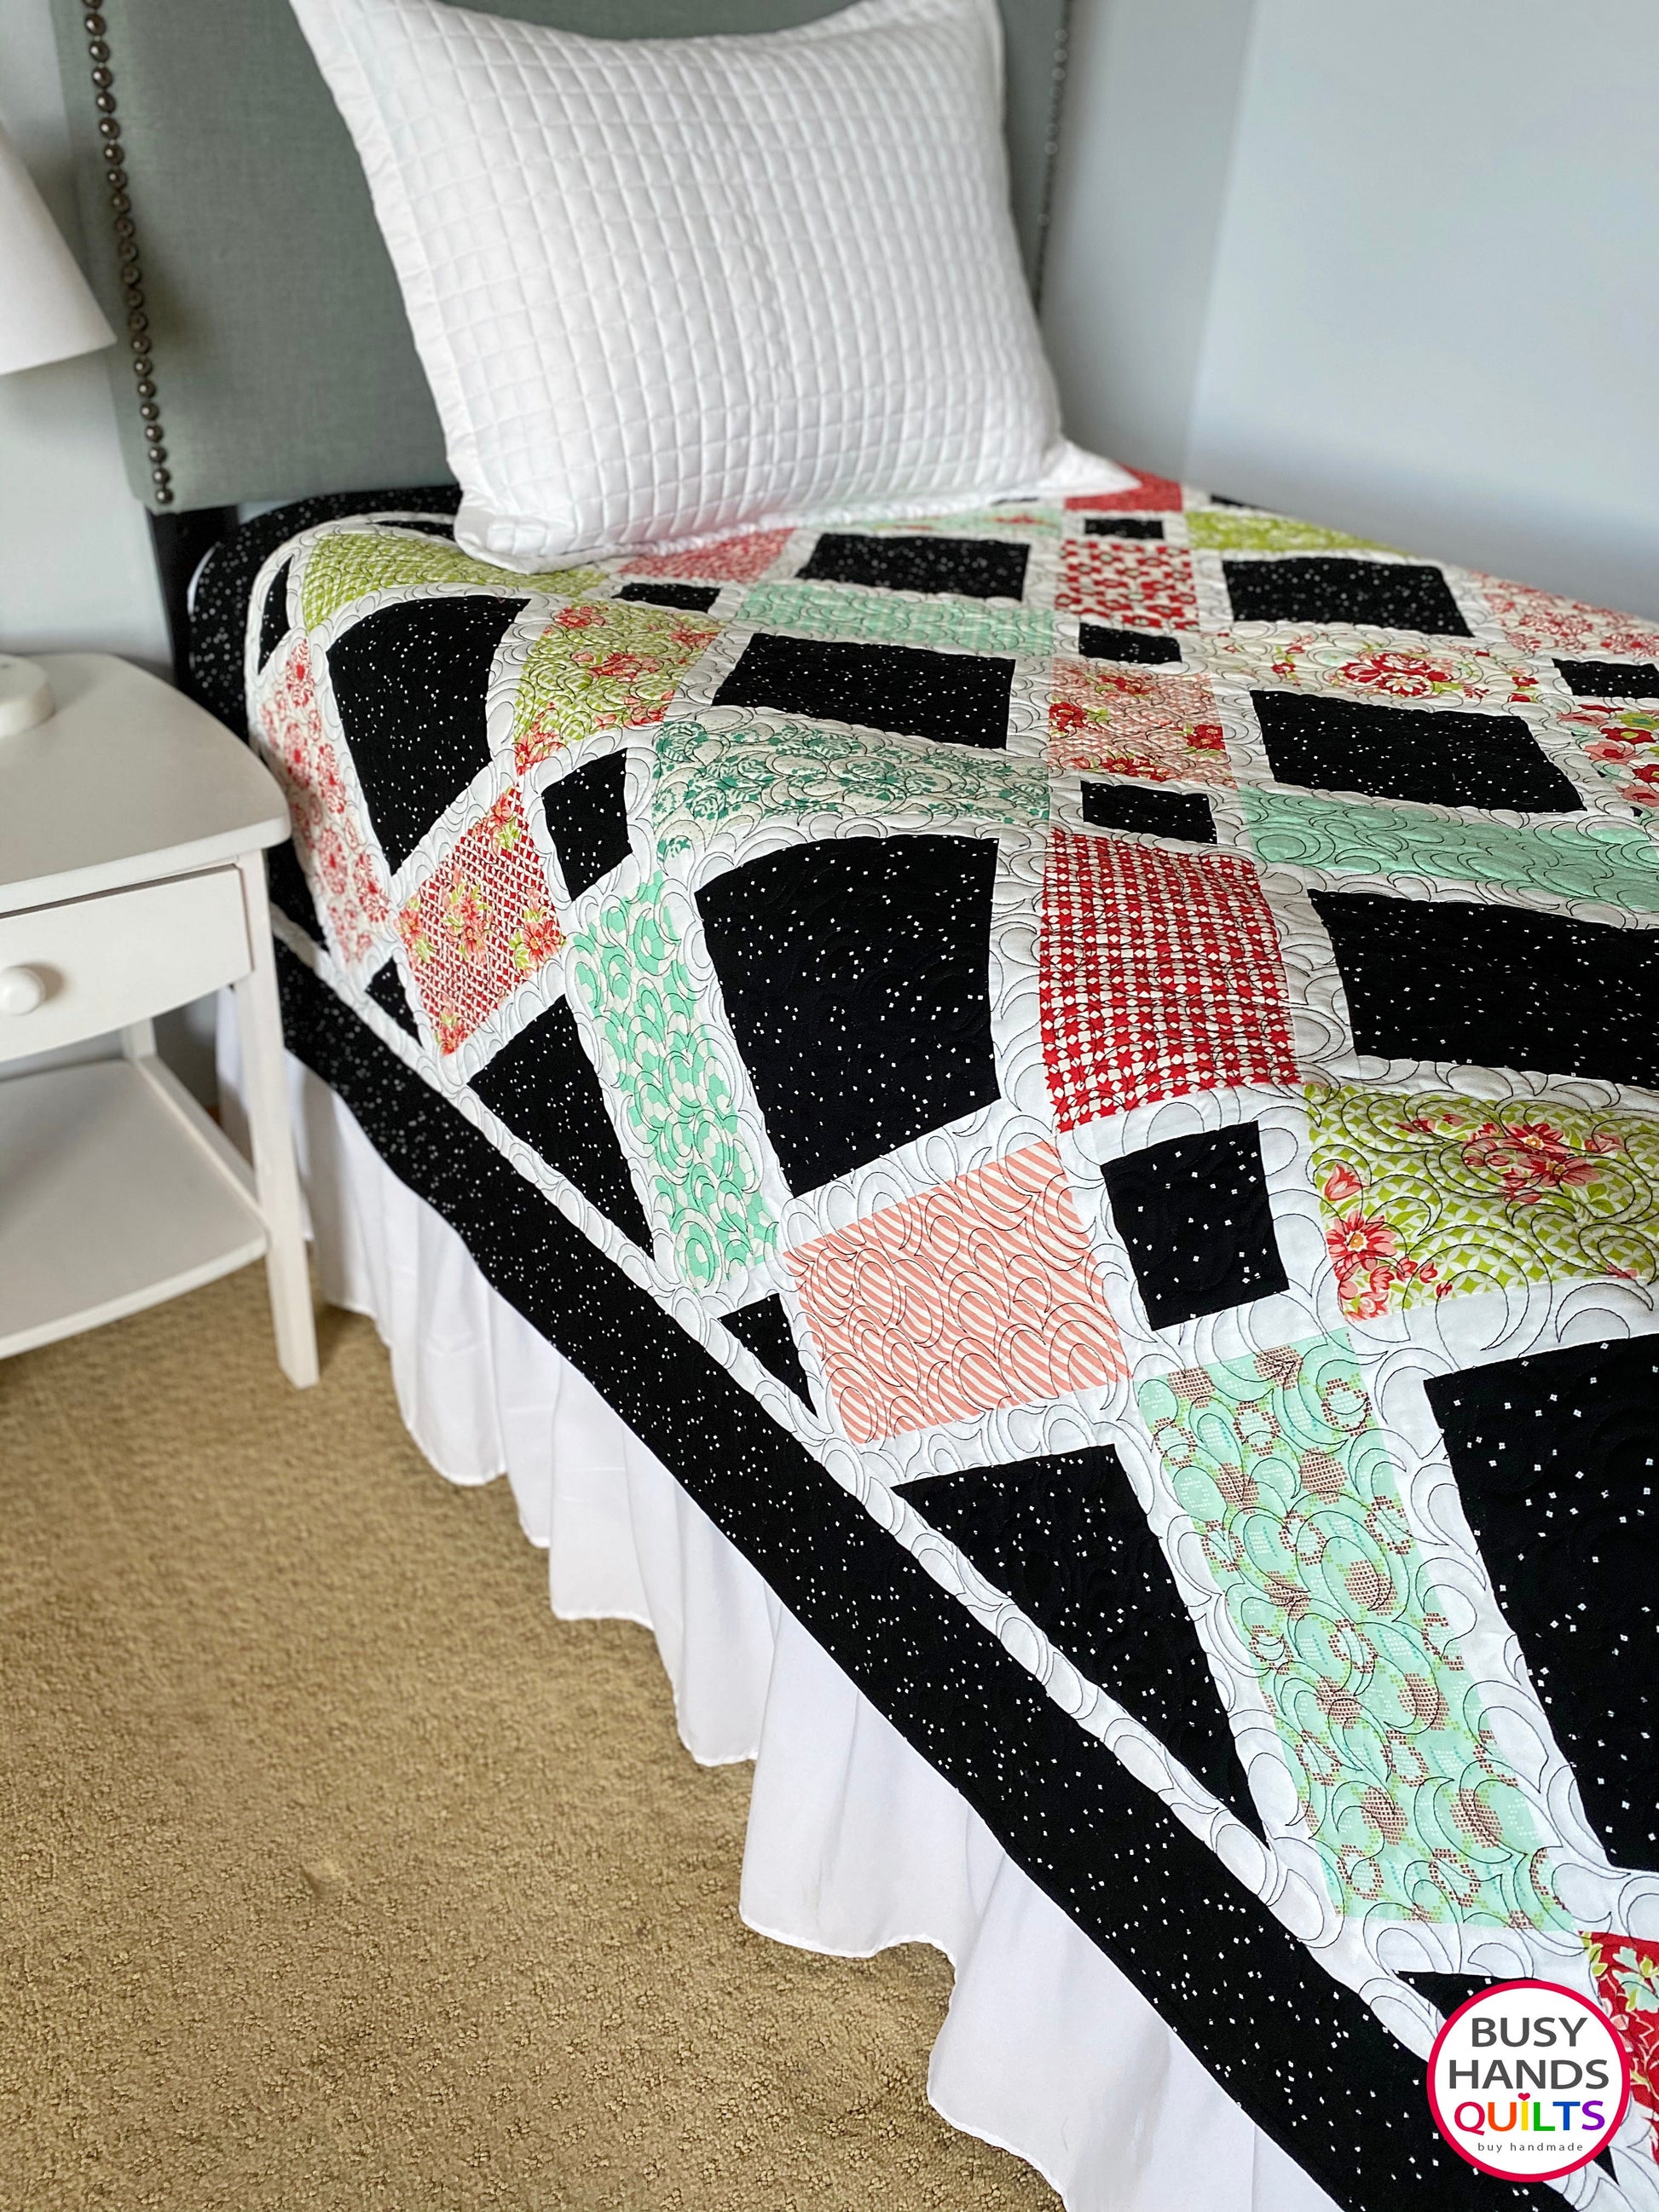 Handmade Looking Glass Twin Bed Quilt Busy Hands Quilts $389